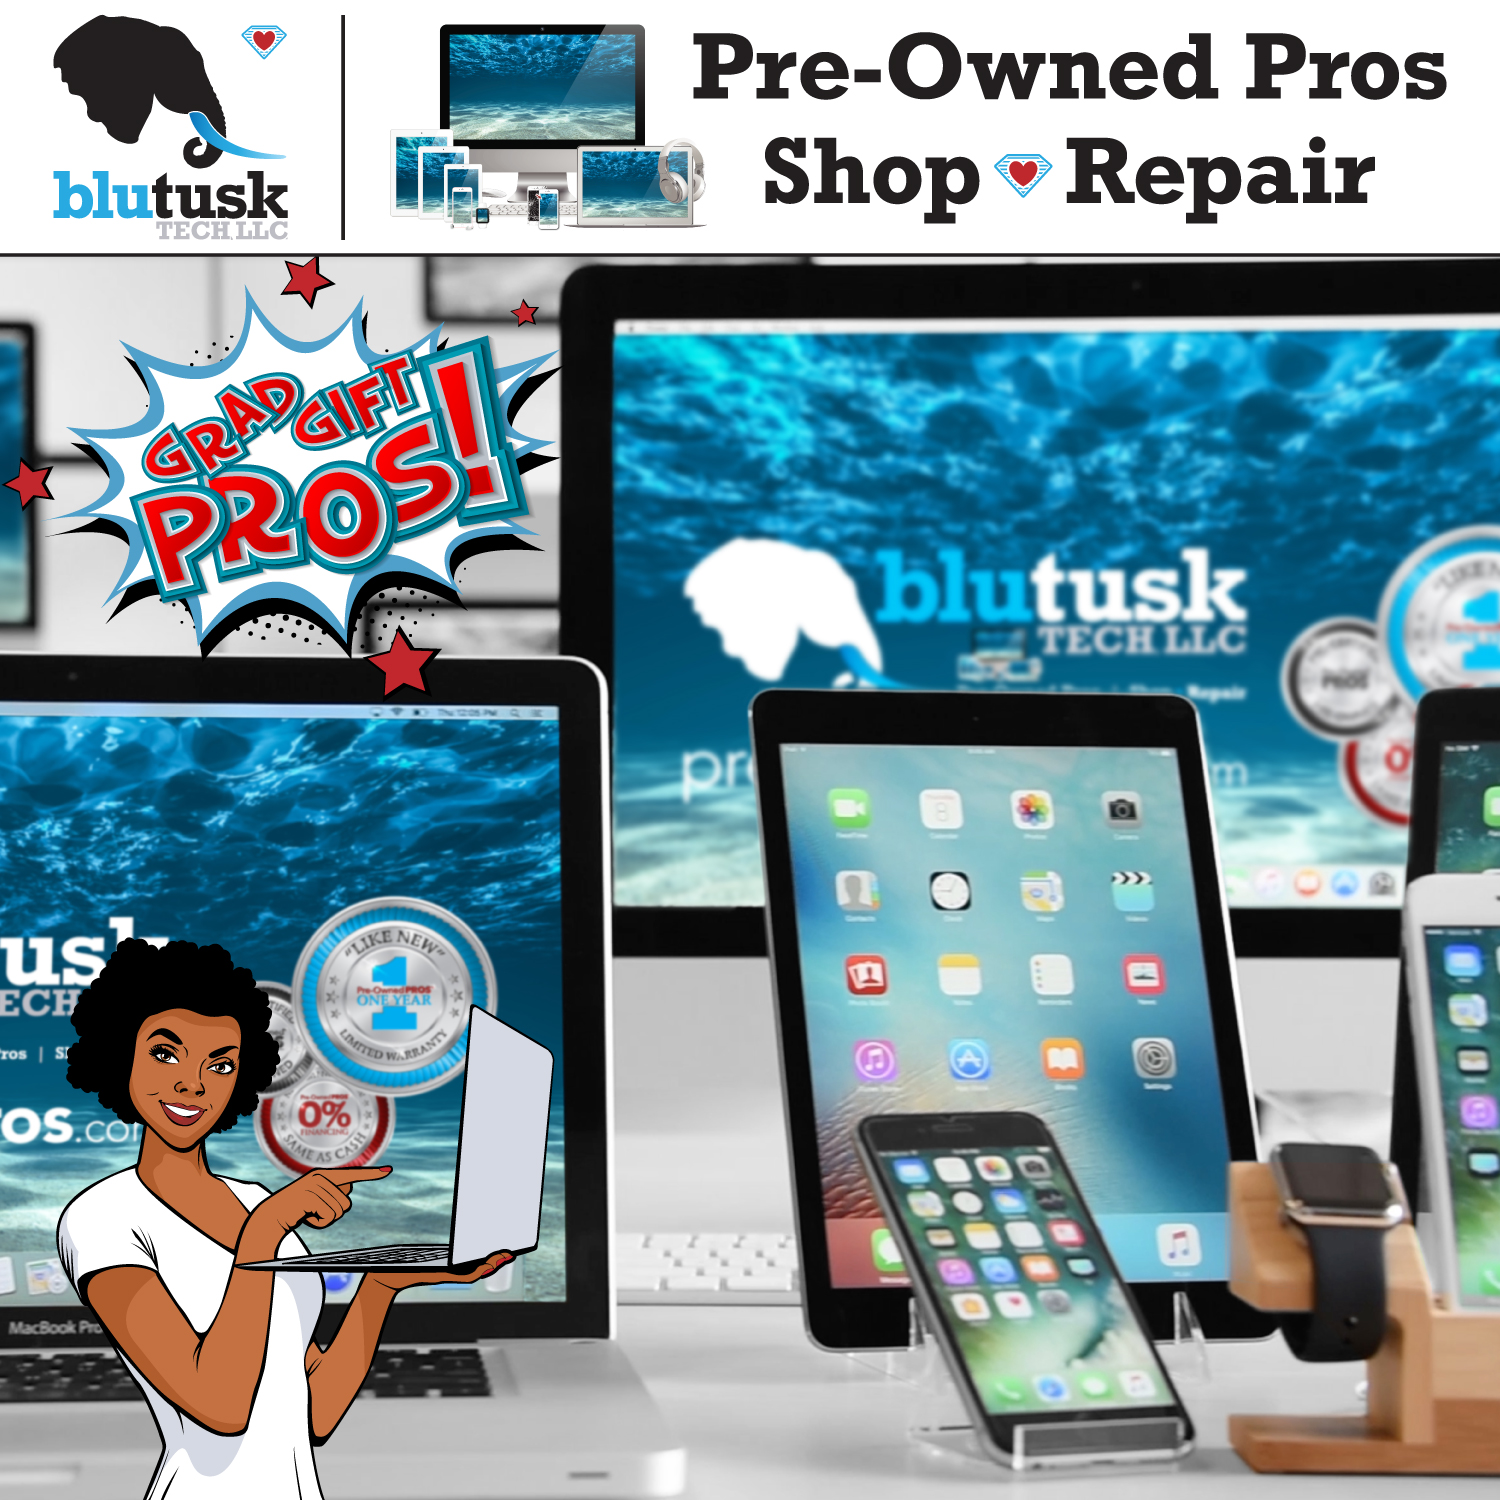 Number 9, Great Product Selection, from the top 10 reasons to shop with The Pre-Owned Pros at Blutusk Tech, LLC 